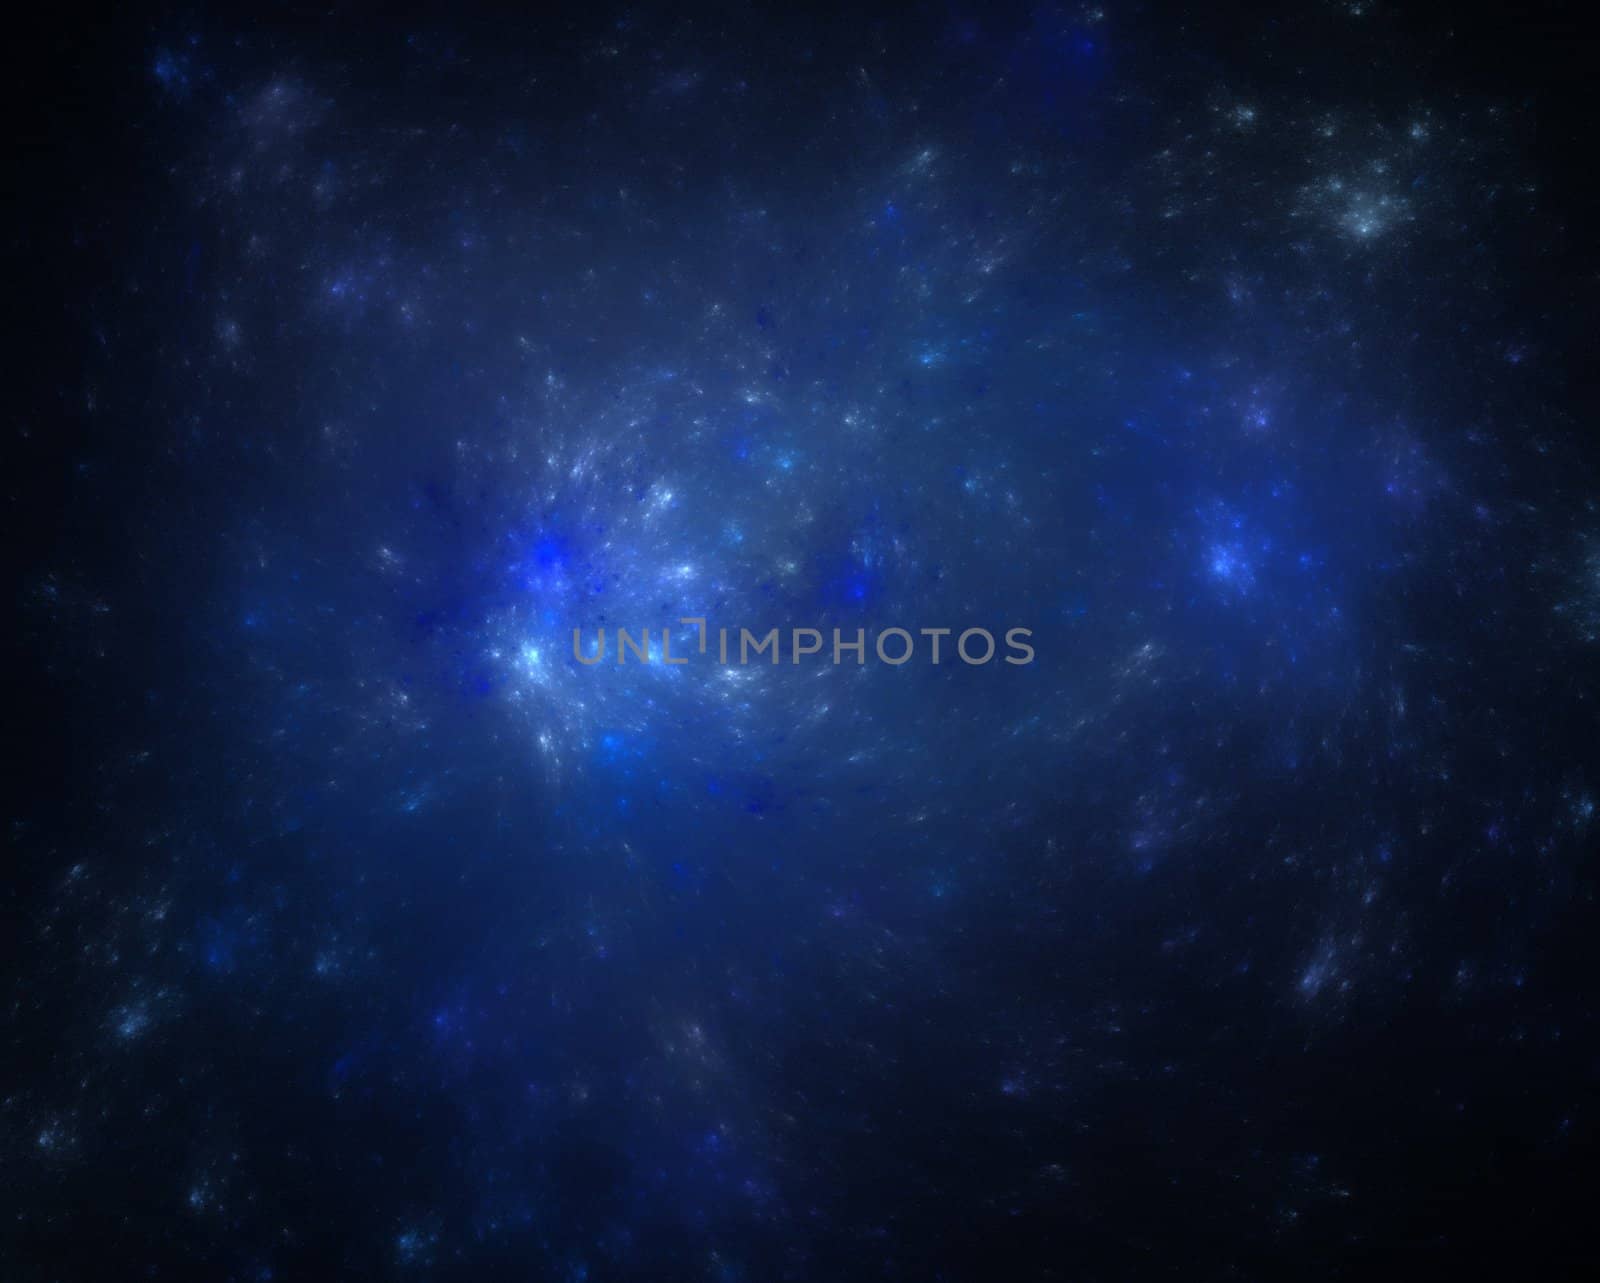 Abstract illustration of cosmos stars on a background of black